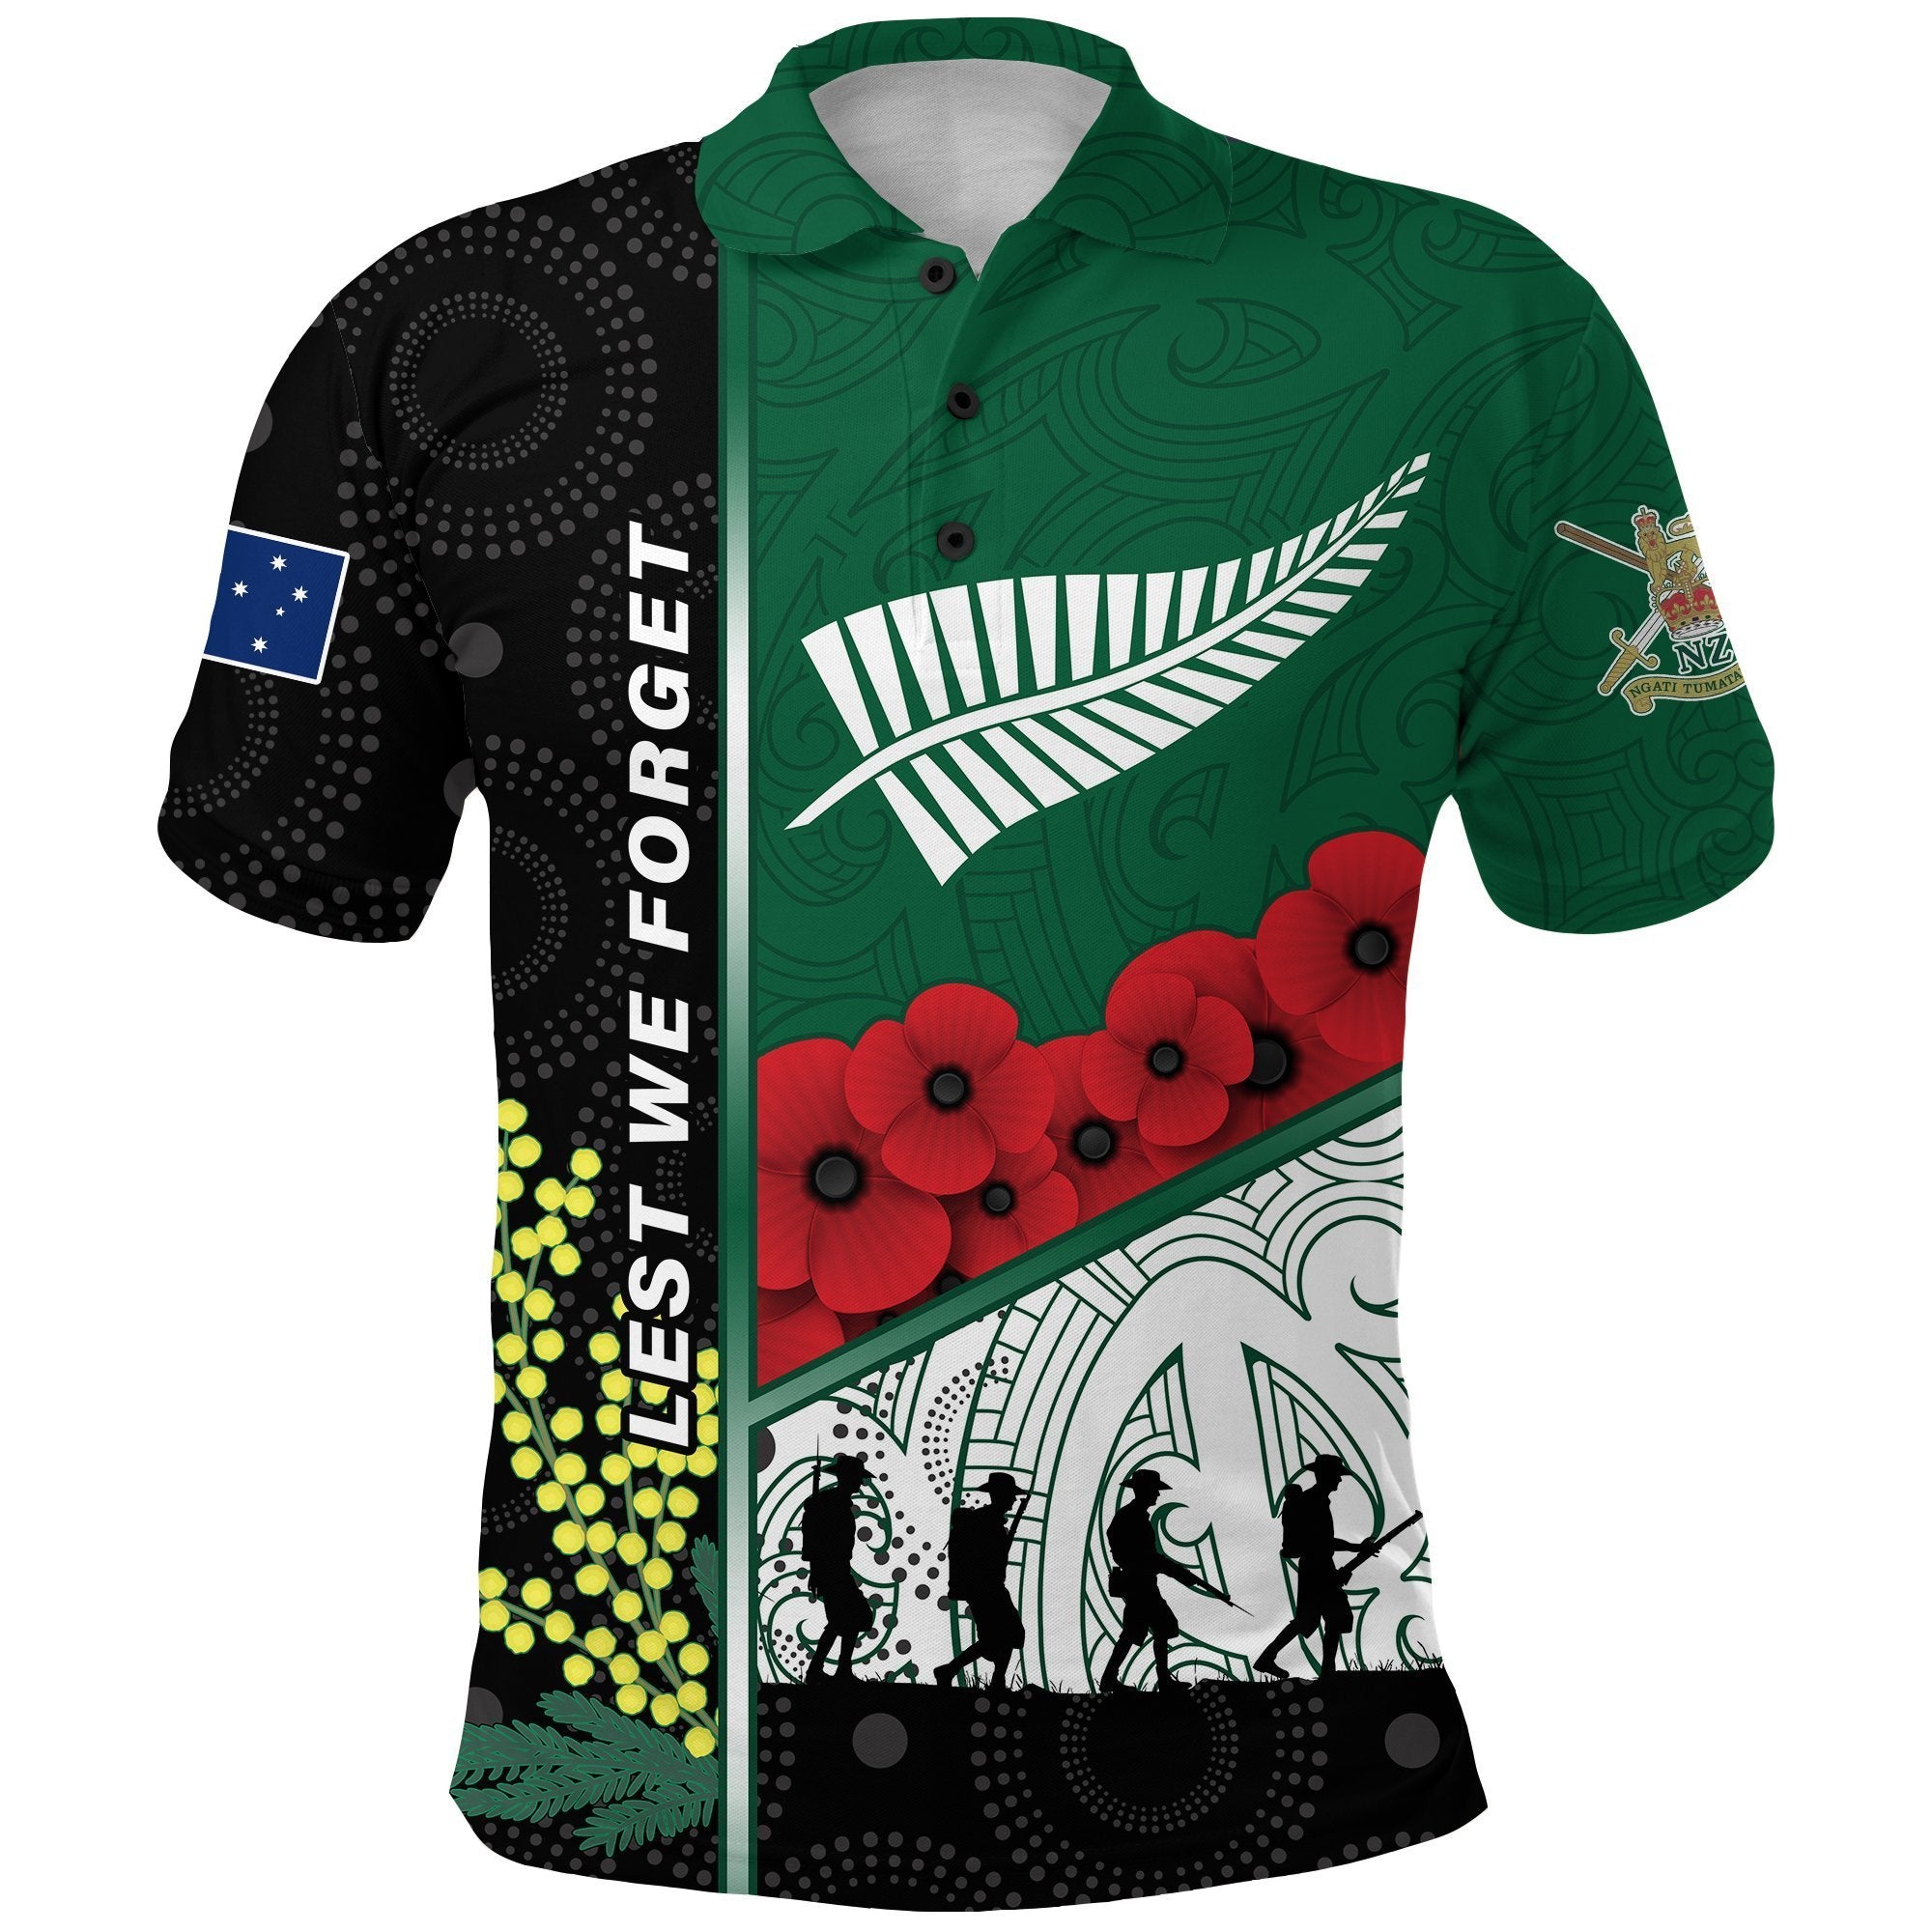 ANZAC Day Lest We Forget Polo Shirt Australia Indigenous and New Zealand Maori Unisex Green - Polynesian Pride